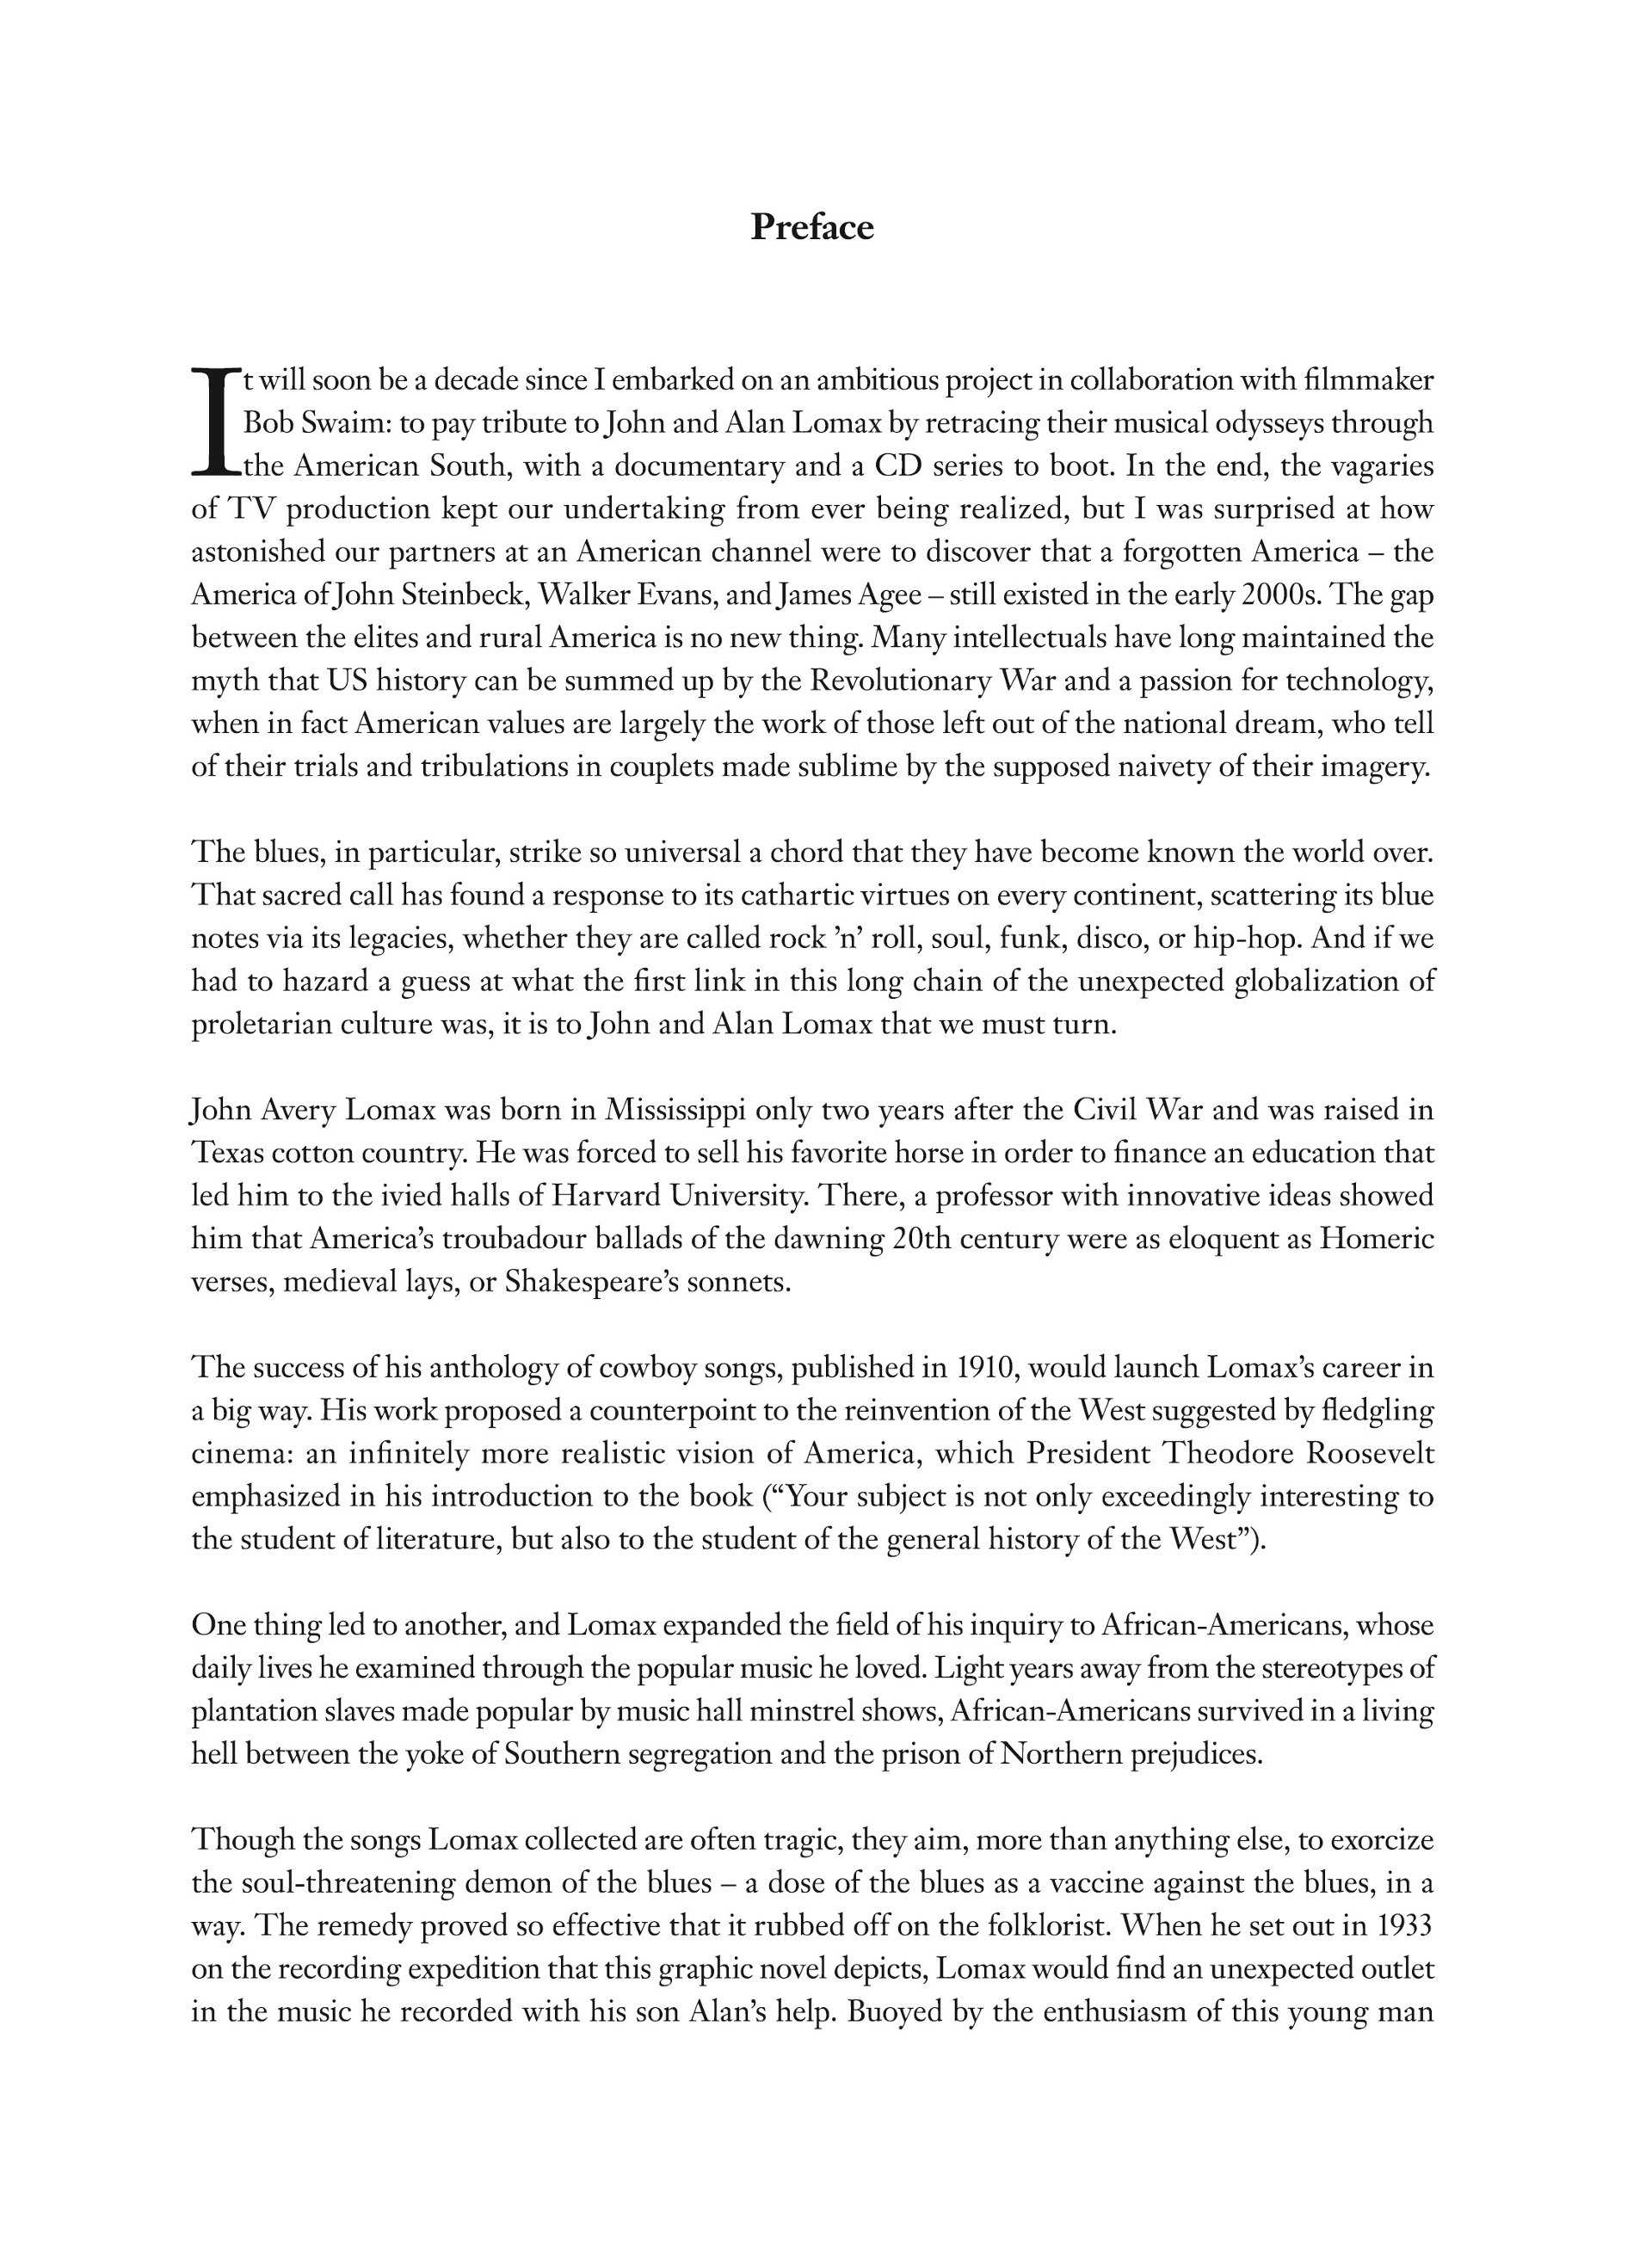 Lomax: Collectors of Folk Songs (2020): Chapter 1 - Page 4